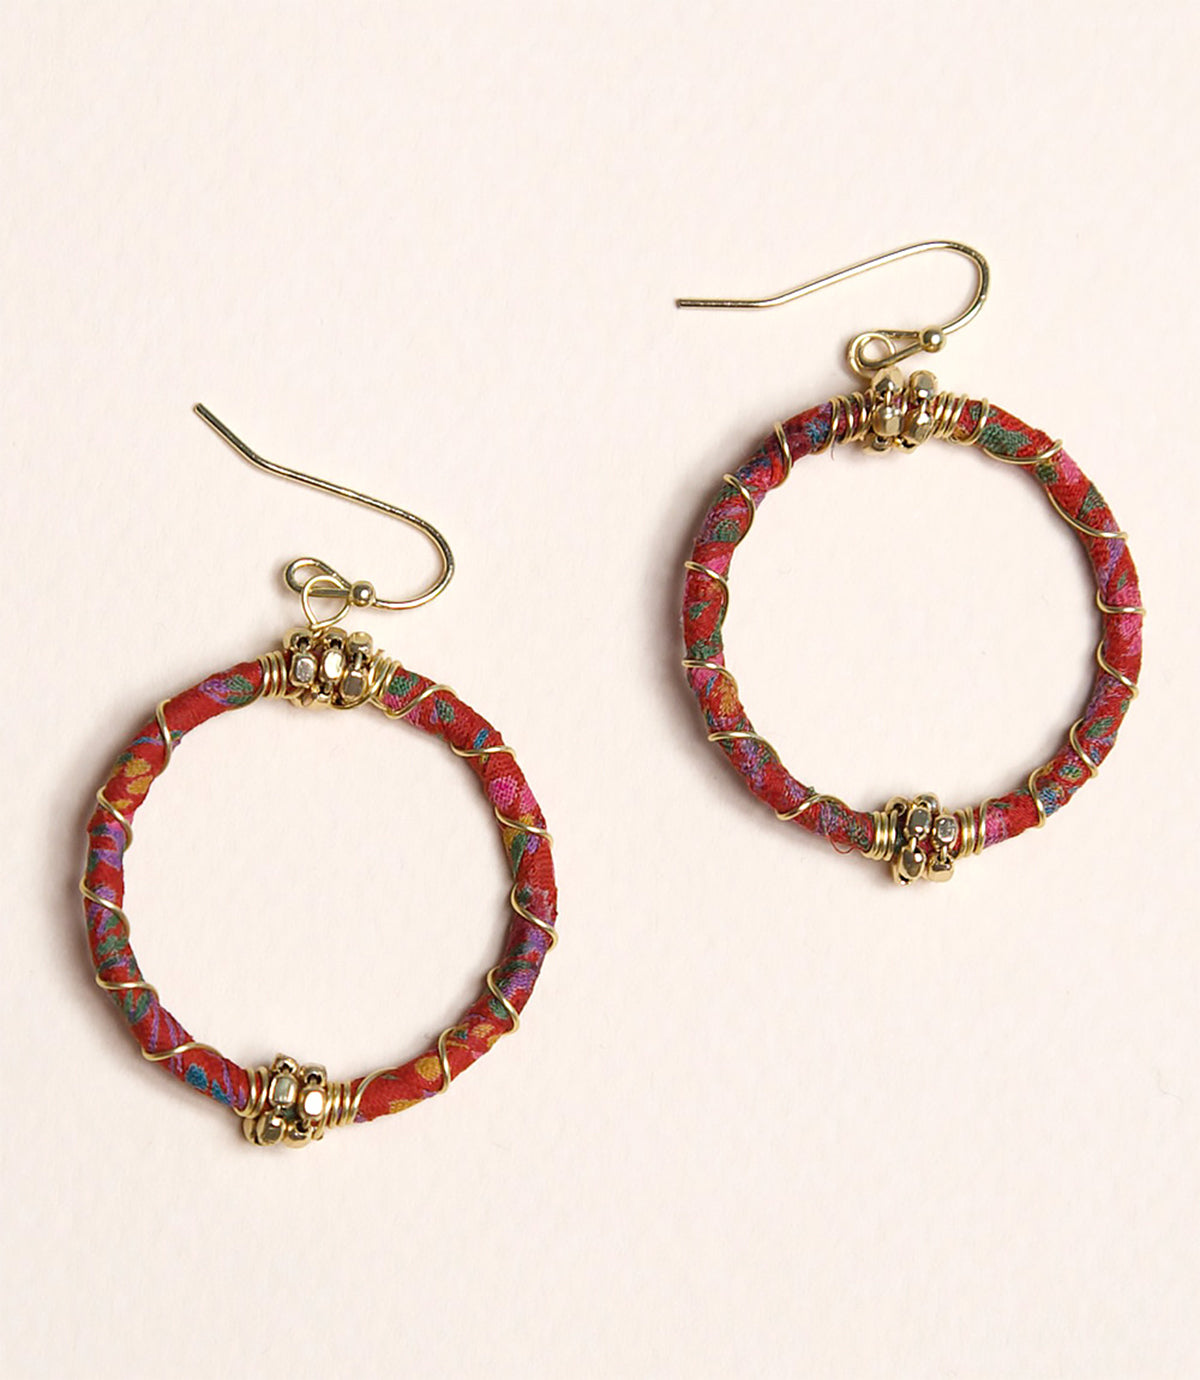 Upcycled Fabric Earrings - Wrapped Hoops with Brass Twist